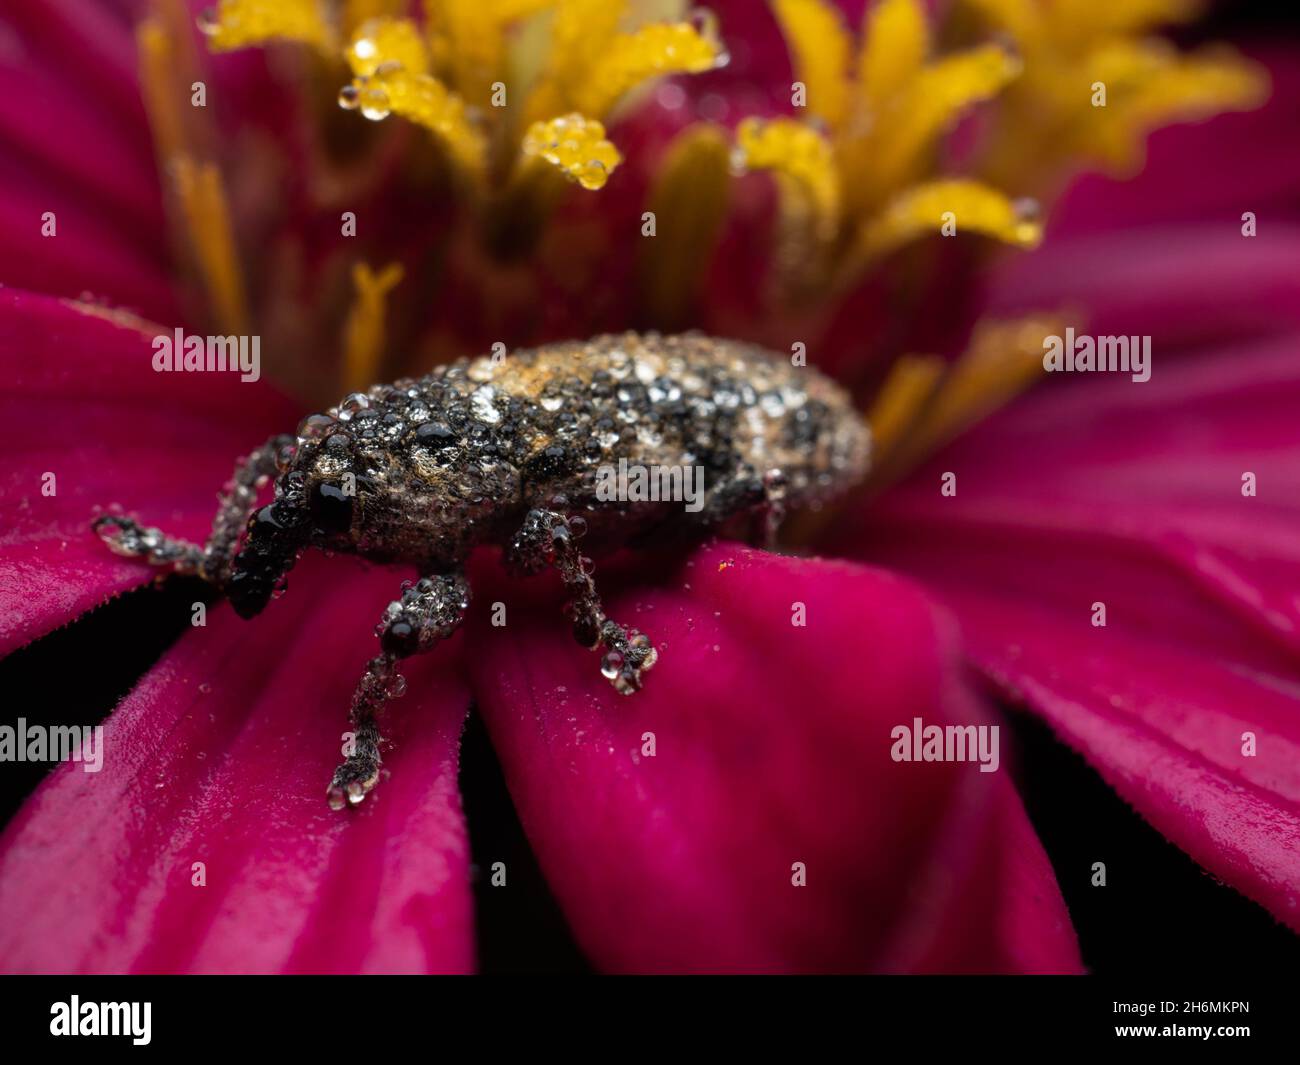 Weevils are beetles belonging to the superfamily Curculionoidea, known for their elongated snouts. They are usually small, less than 6 mm in length, a Stock Photo